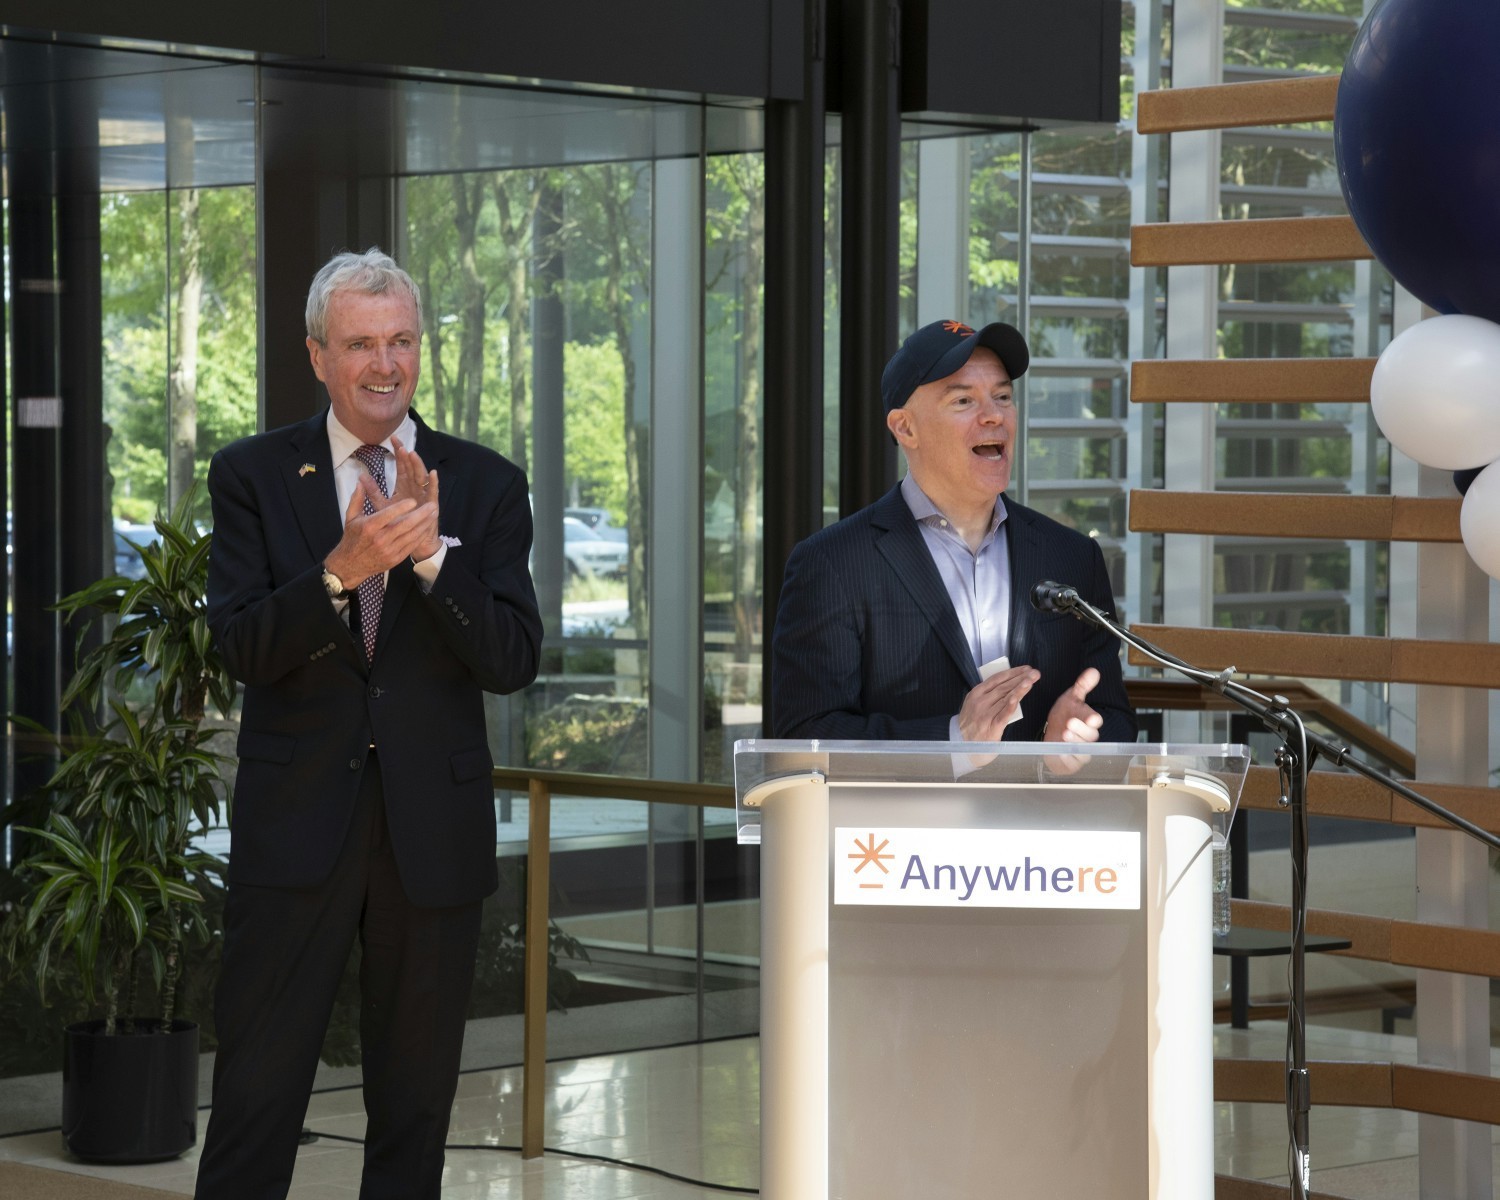 Our CEO, Ryan Schneider, and NJ governor, Phil Murphy, welcoming employees to our refurbished HQ in Madison, NJ.